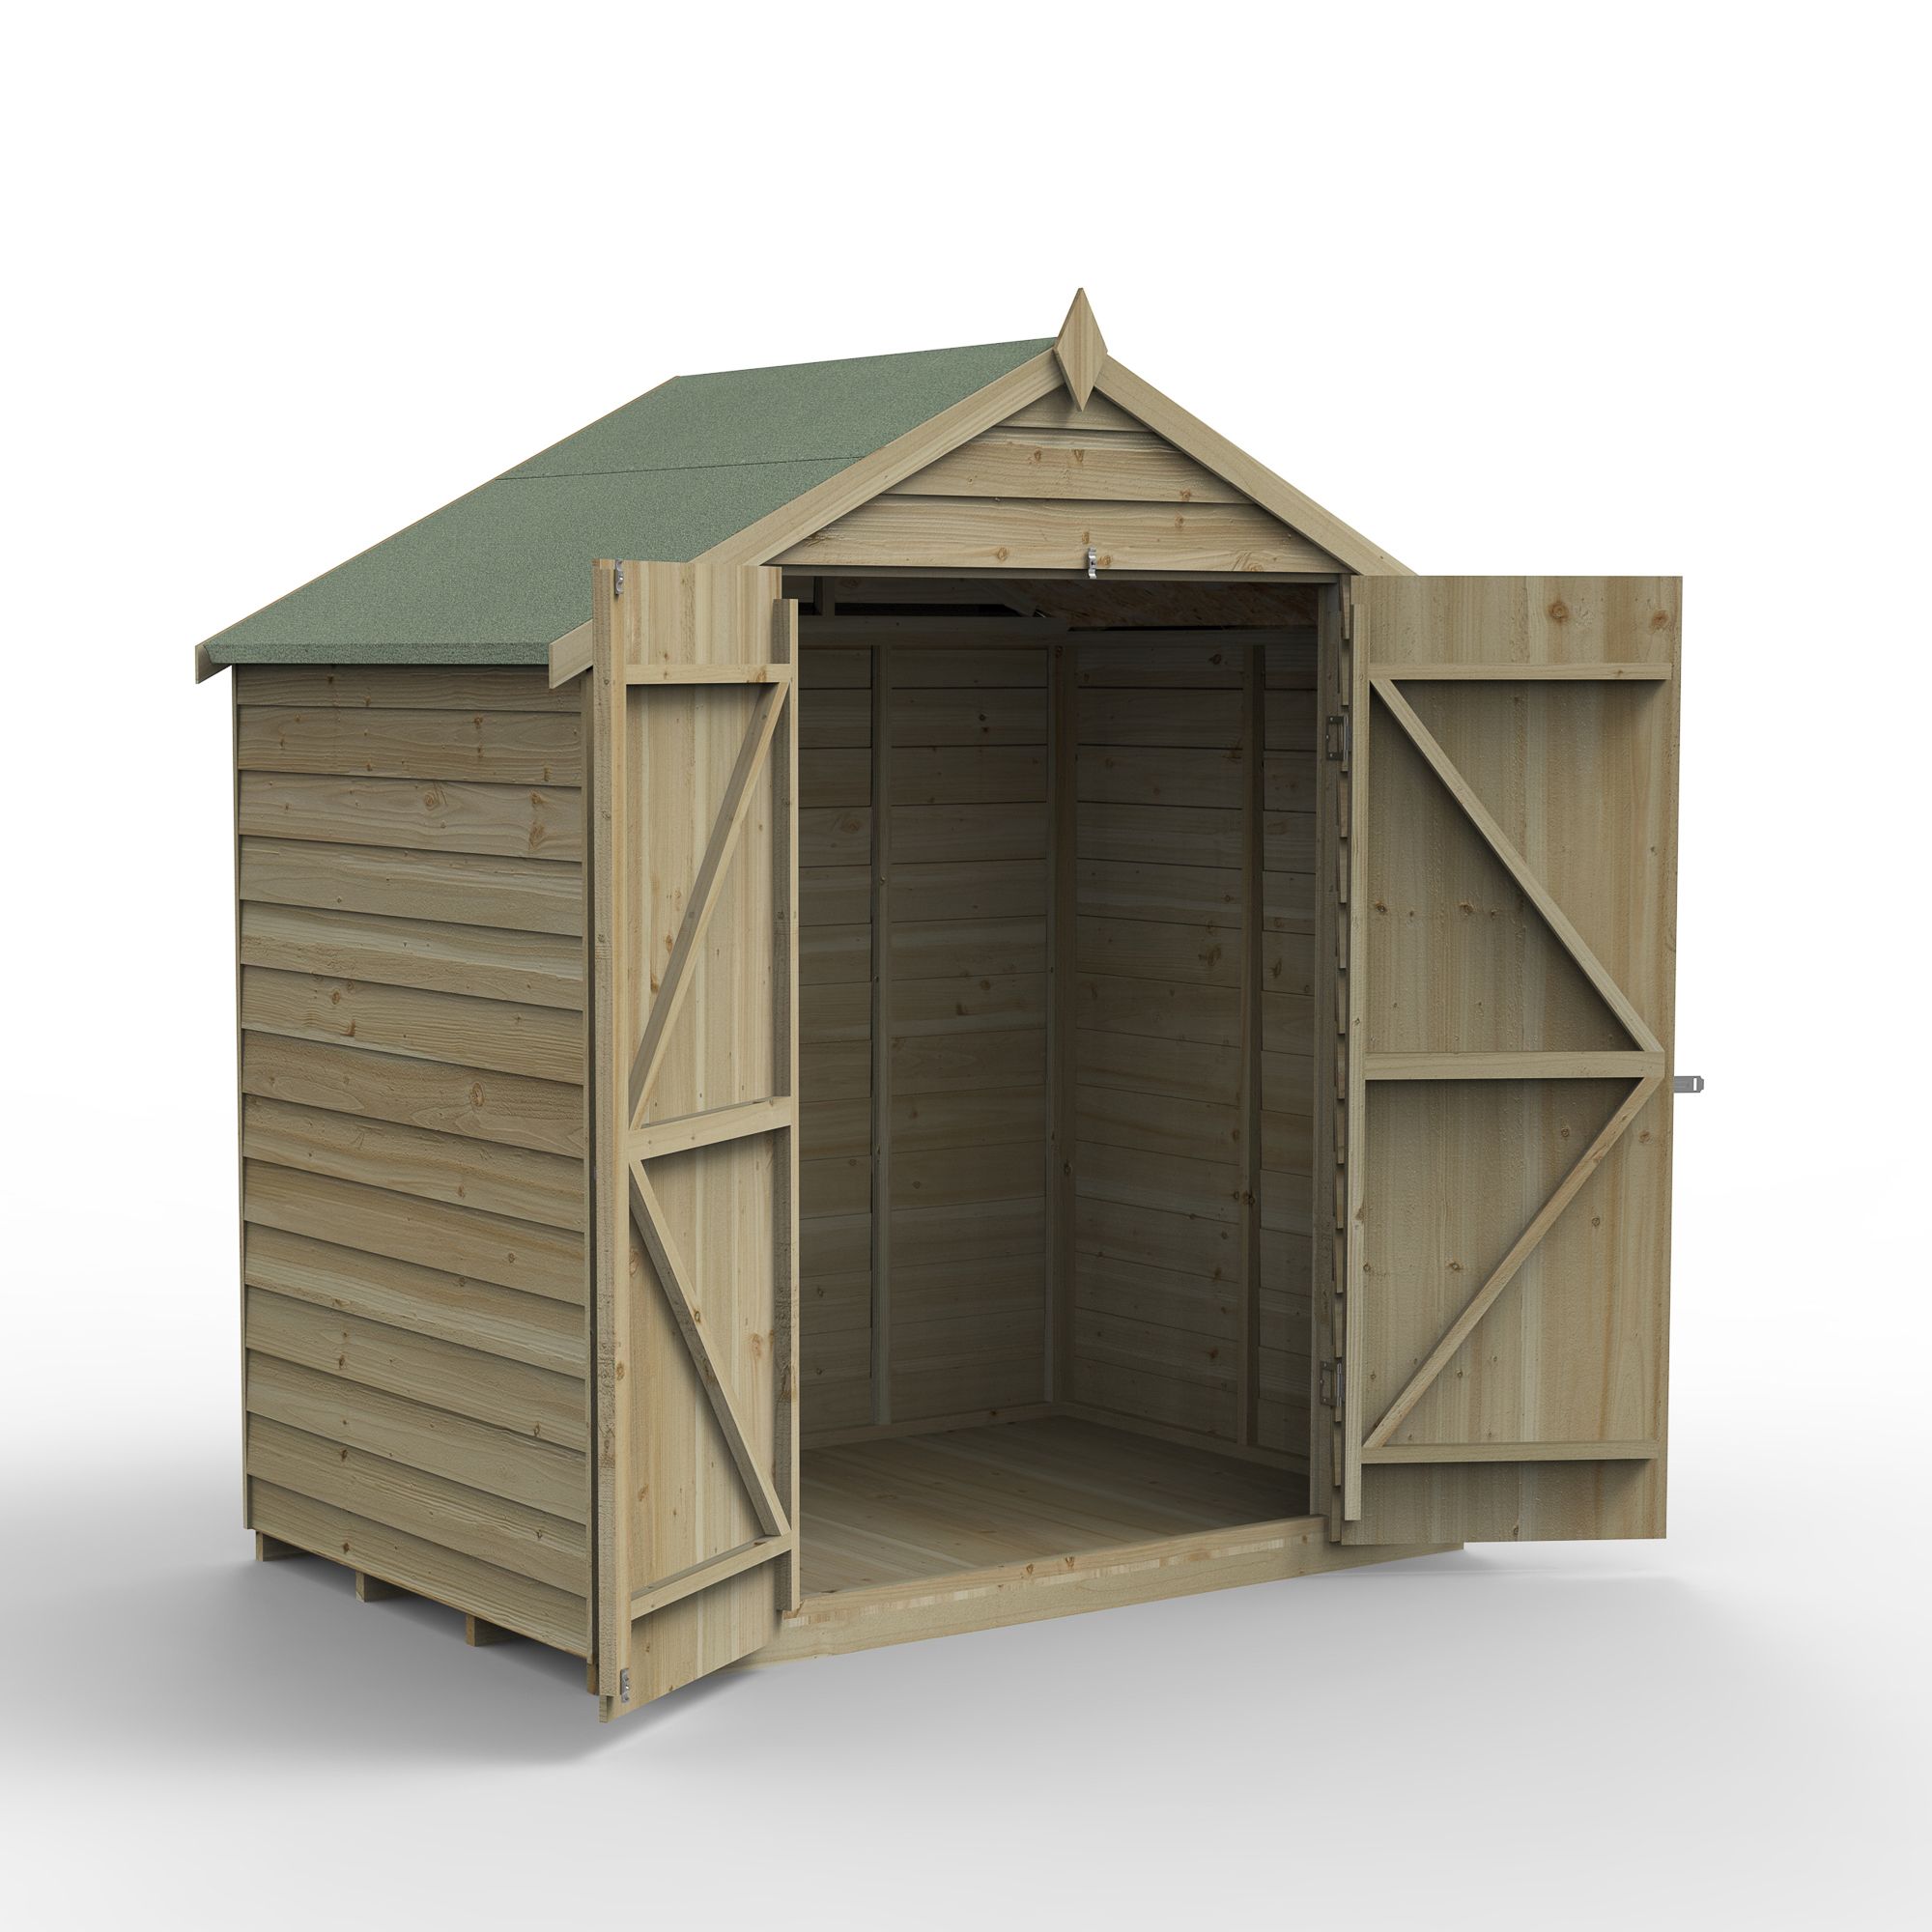 Forest Garden 6X4 Apex Pressure Treated Overlap Wooden Shed With Floor